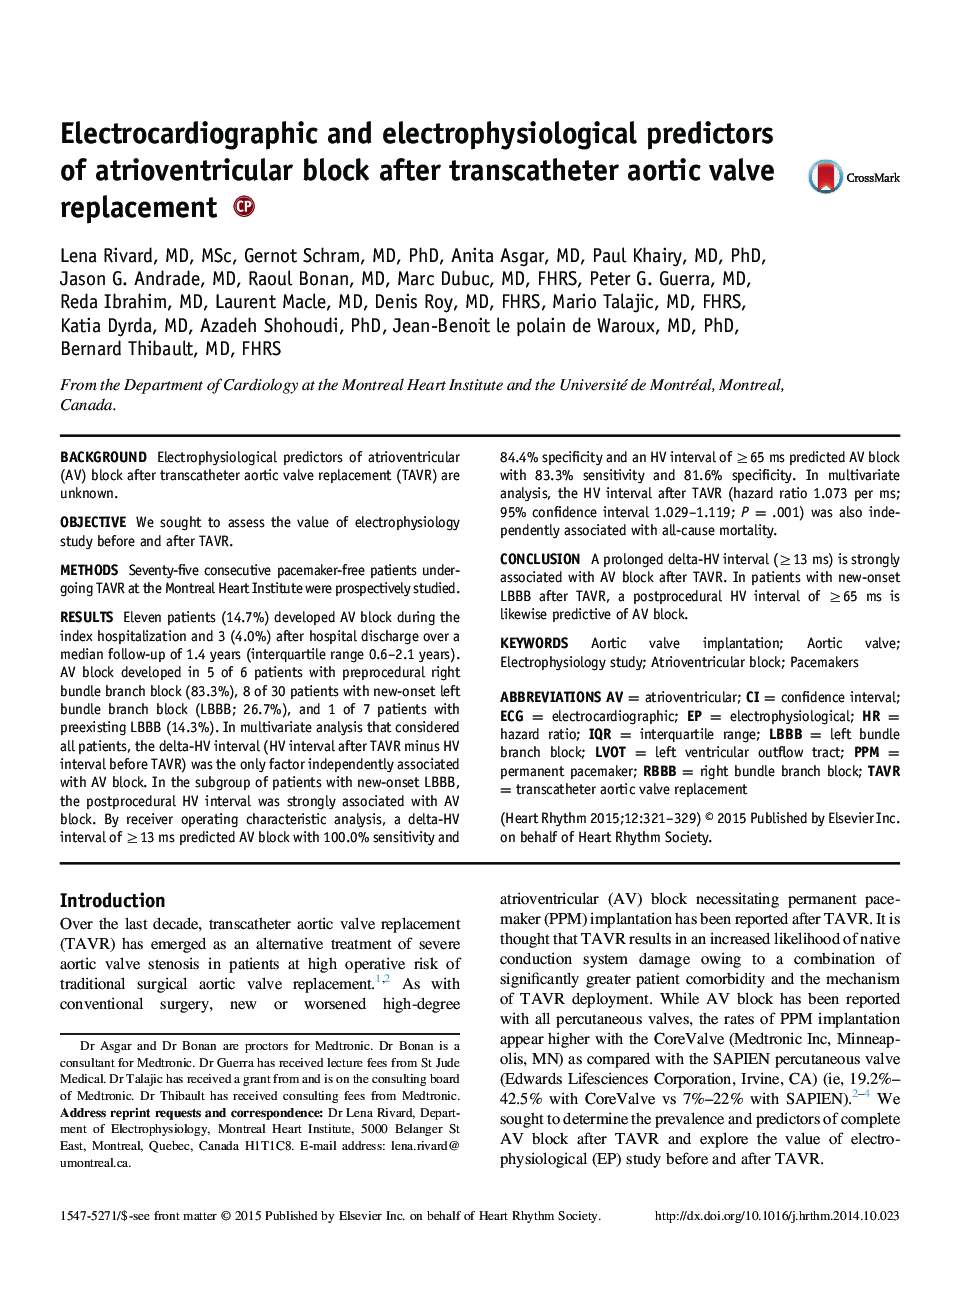 Electrocardiographic and electrophysiological predictors of atrioventricular block after transcatheter aortic valve replacement